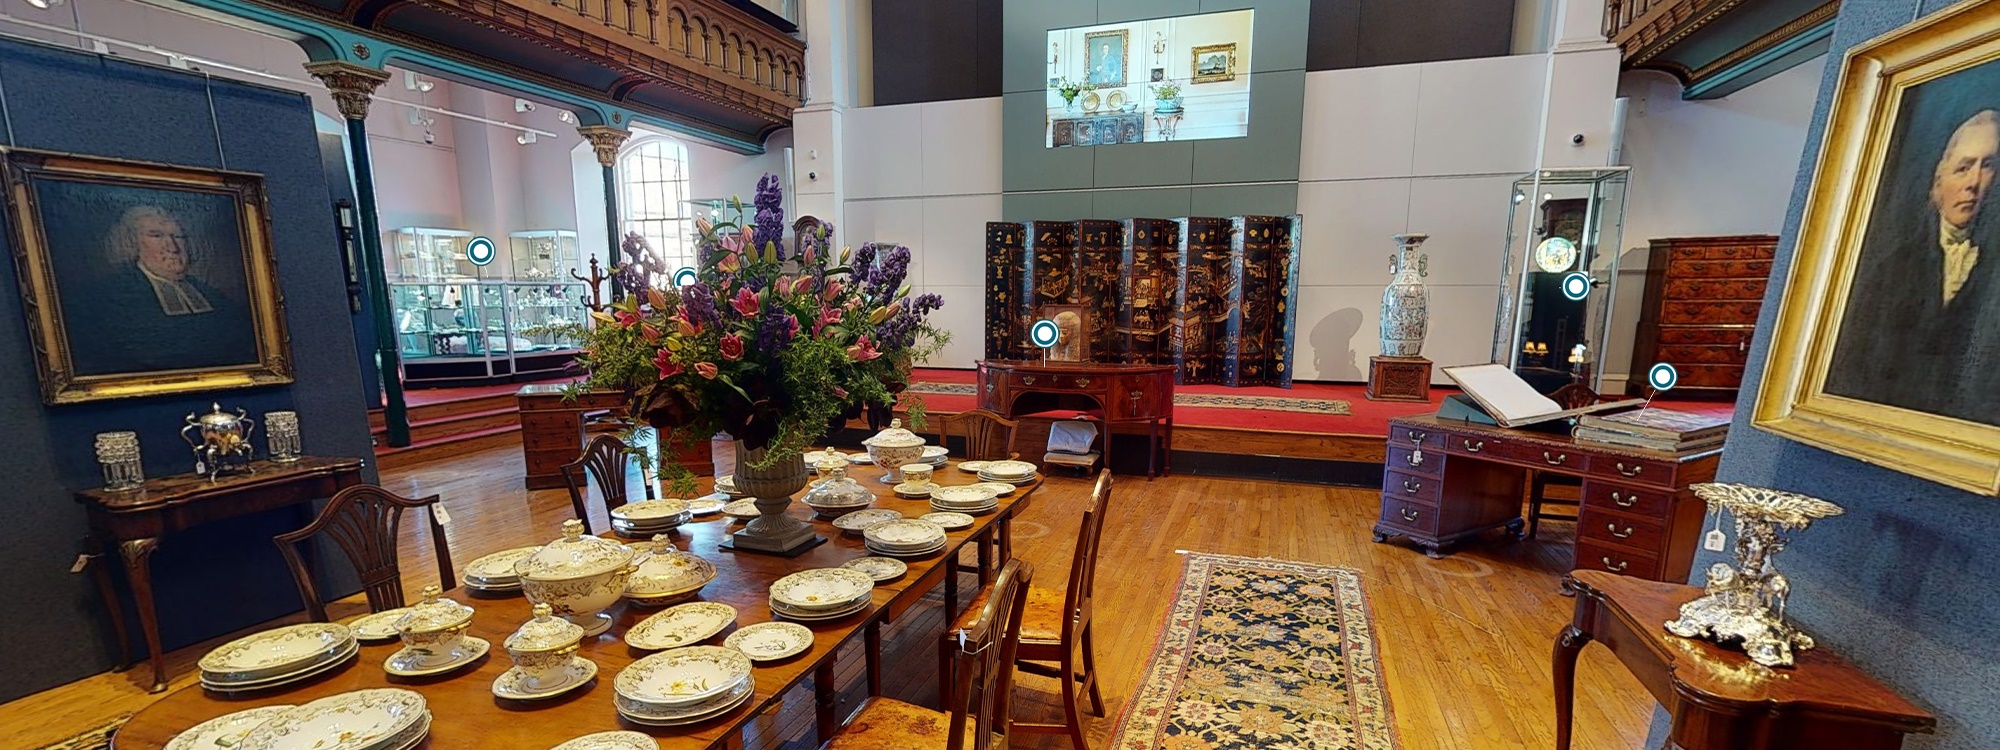 Enjoy a Virtual Tour | The Contents of Lowood House